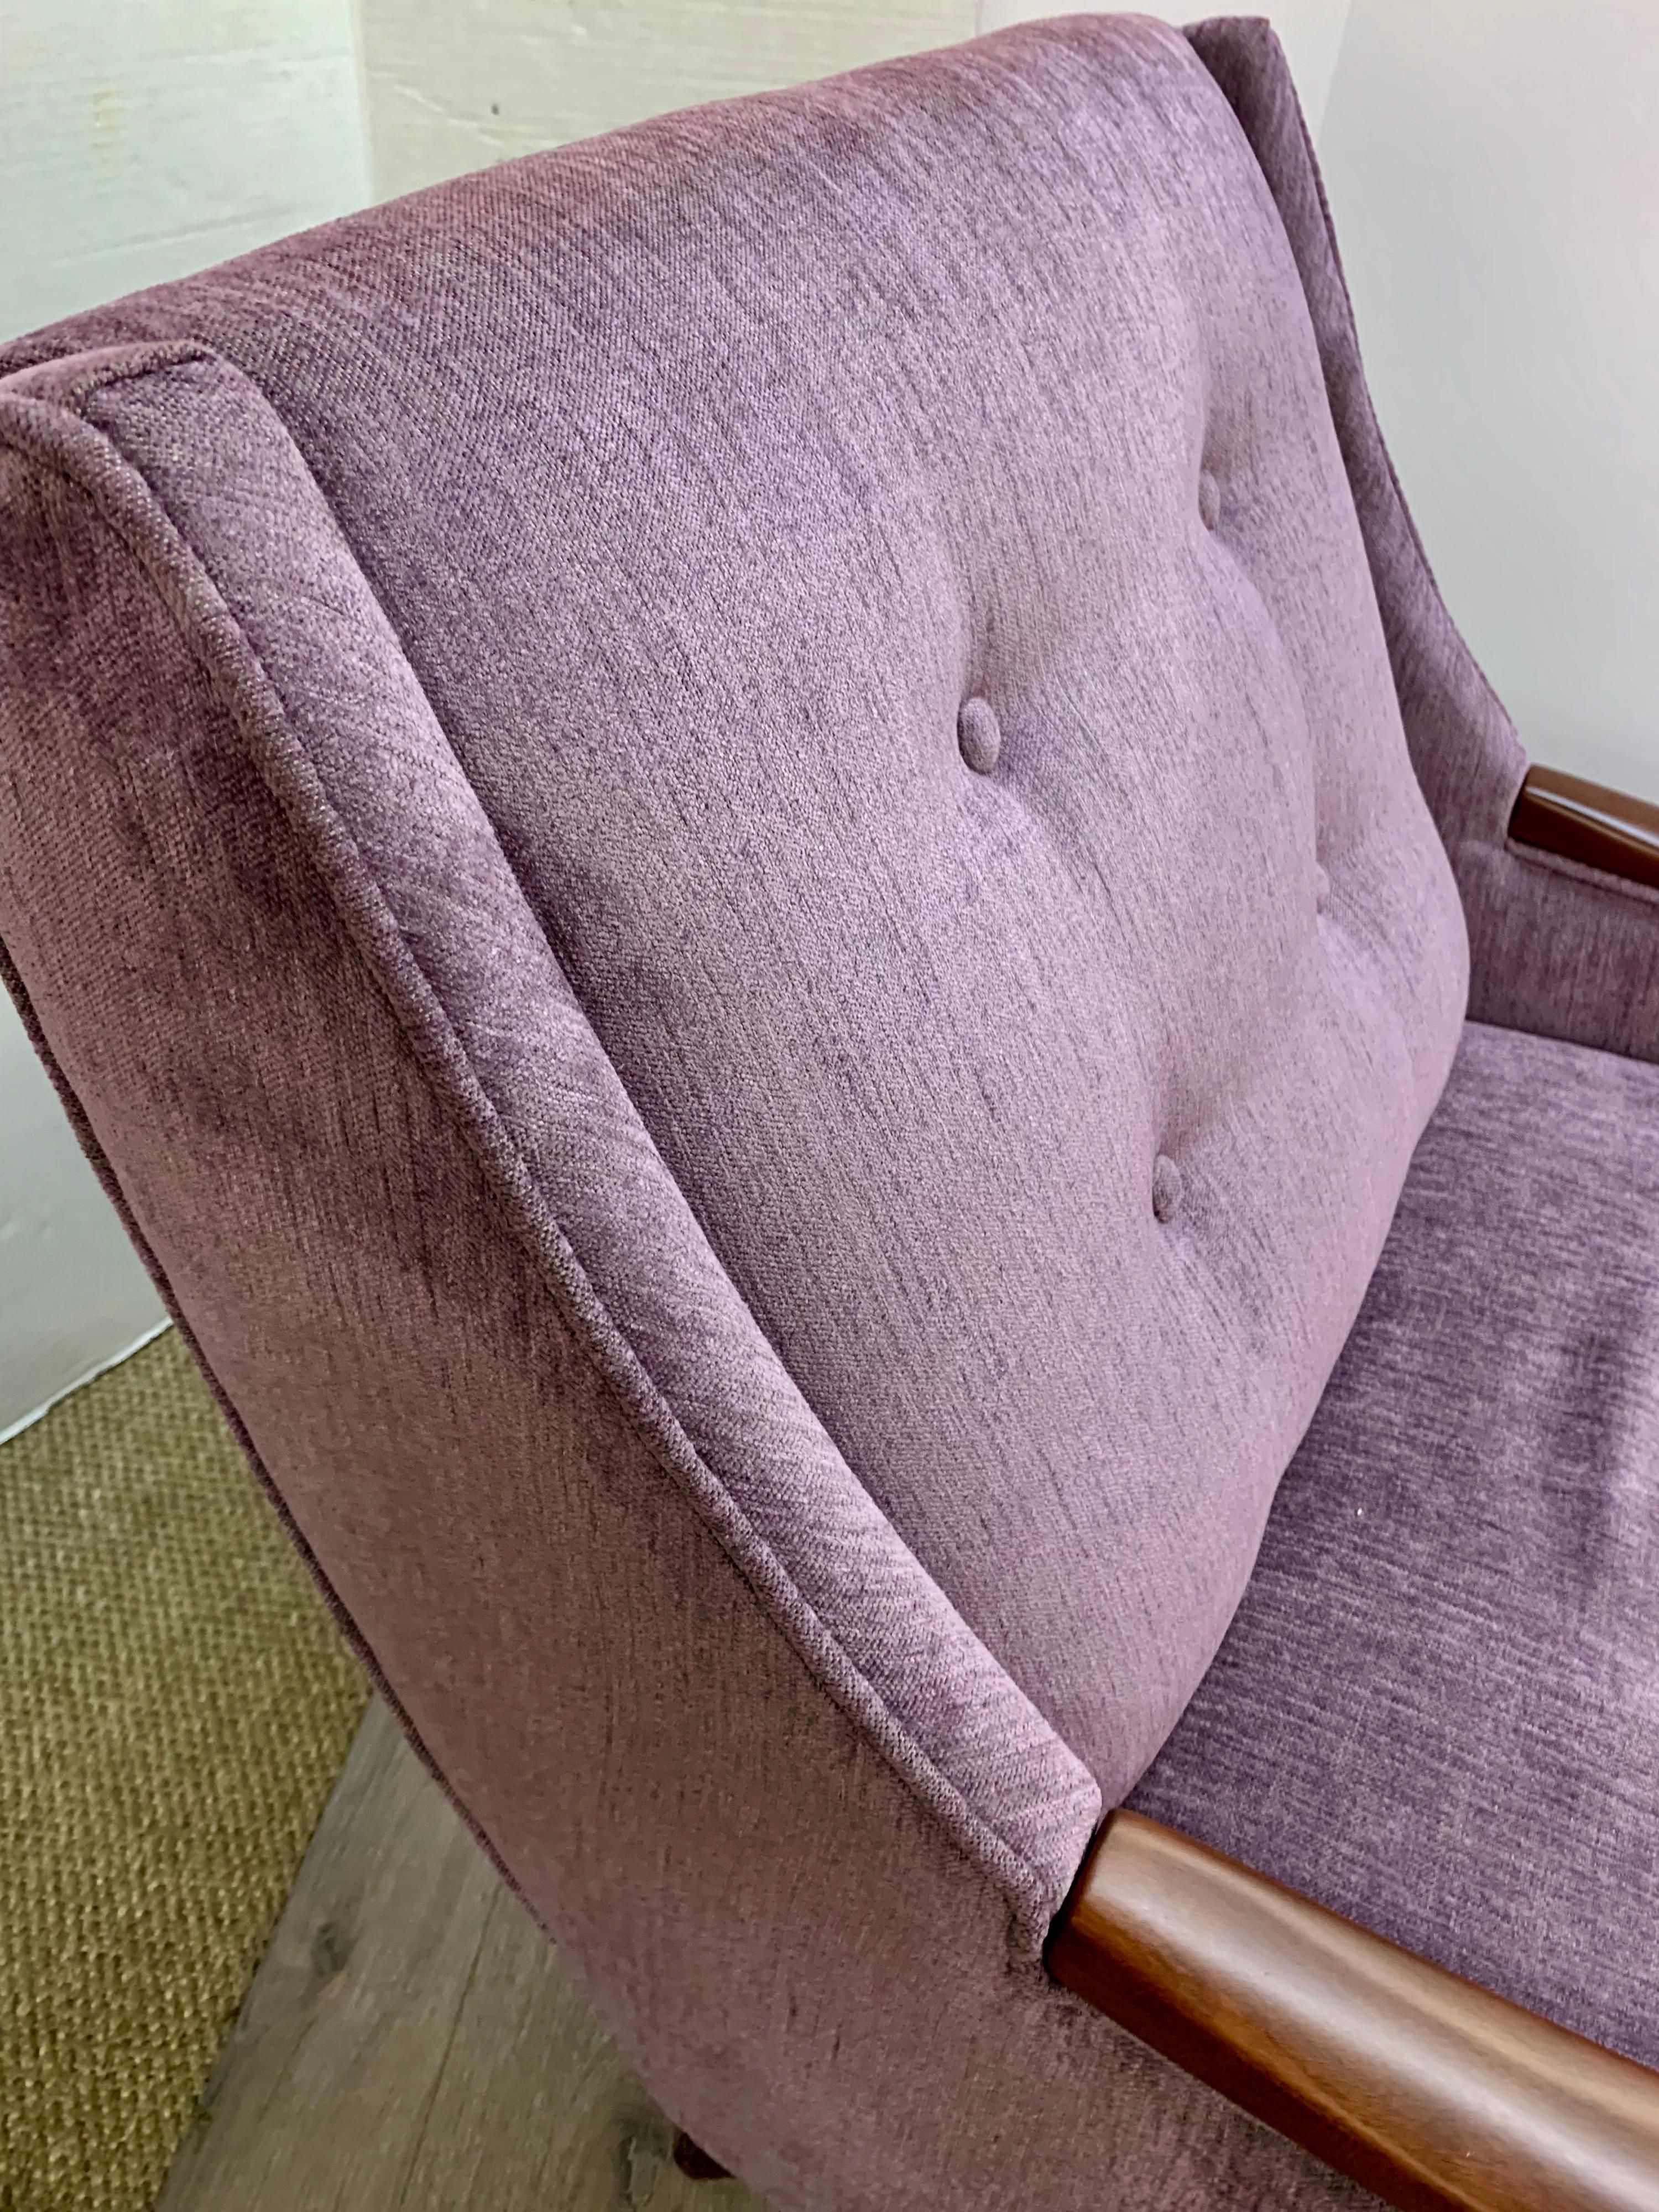 Late 20th Century Mid-Century Modern Tufted Lounge Chair in Lavender Upholstery